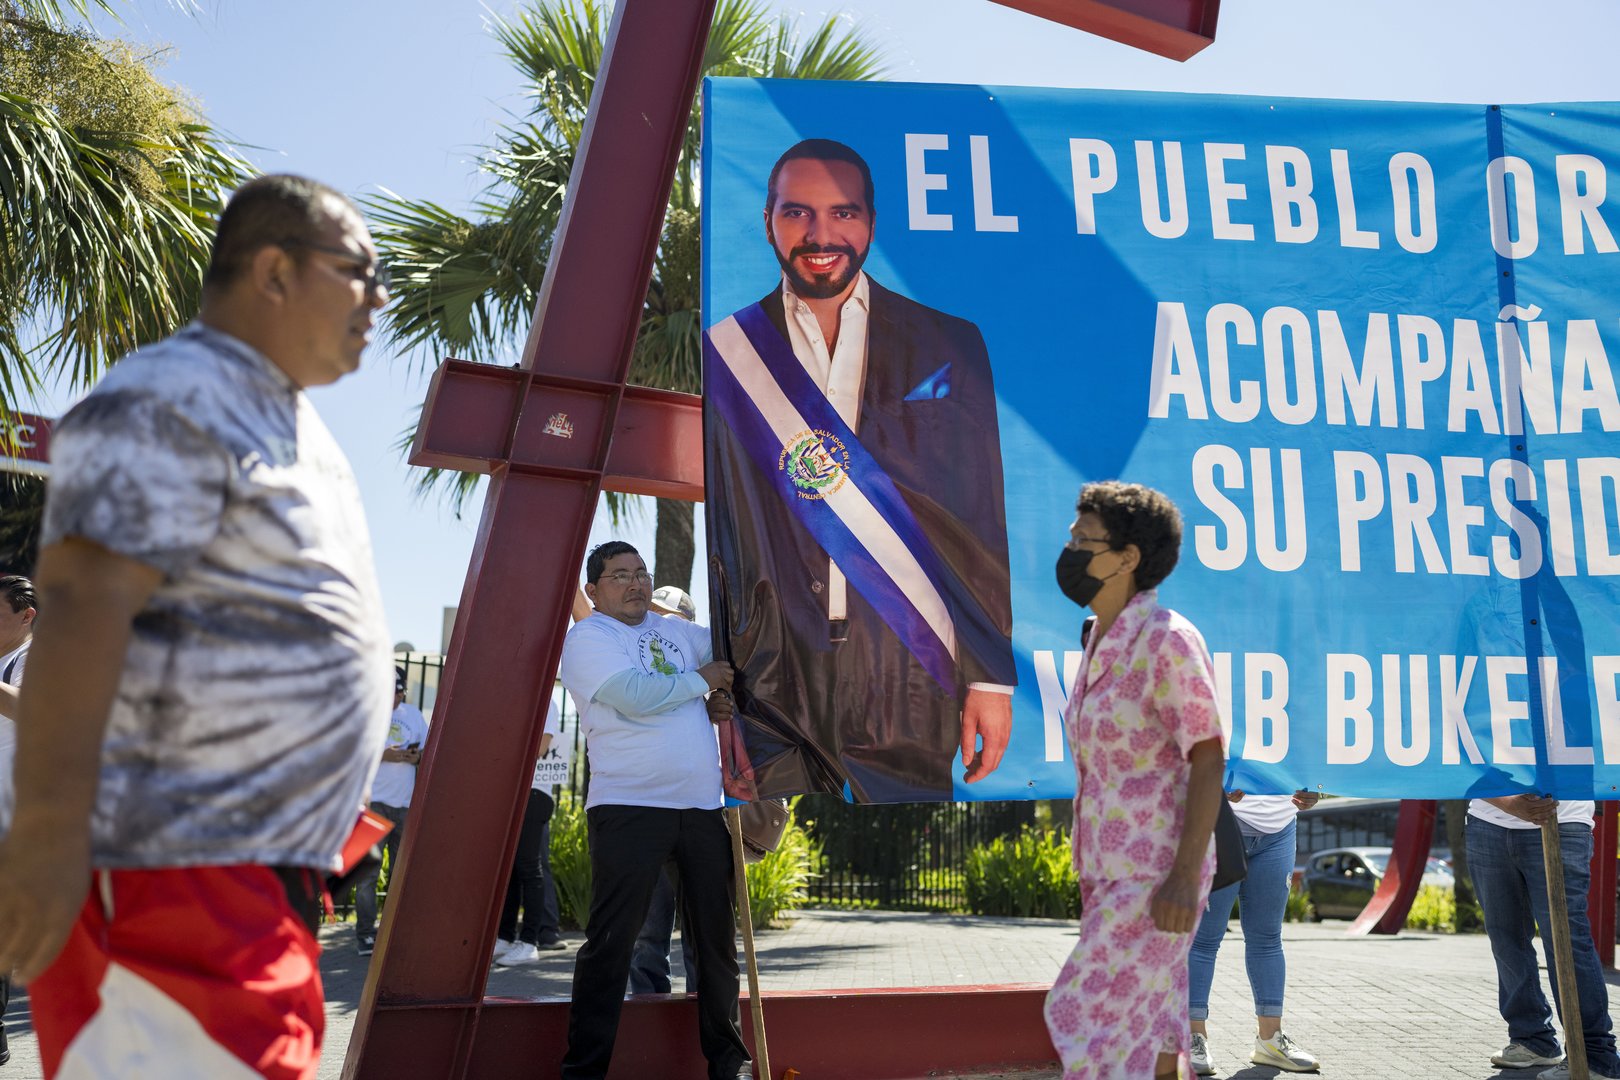 Votes being counted in El Salvador, where strongman president’s victory is all but assured